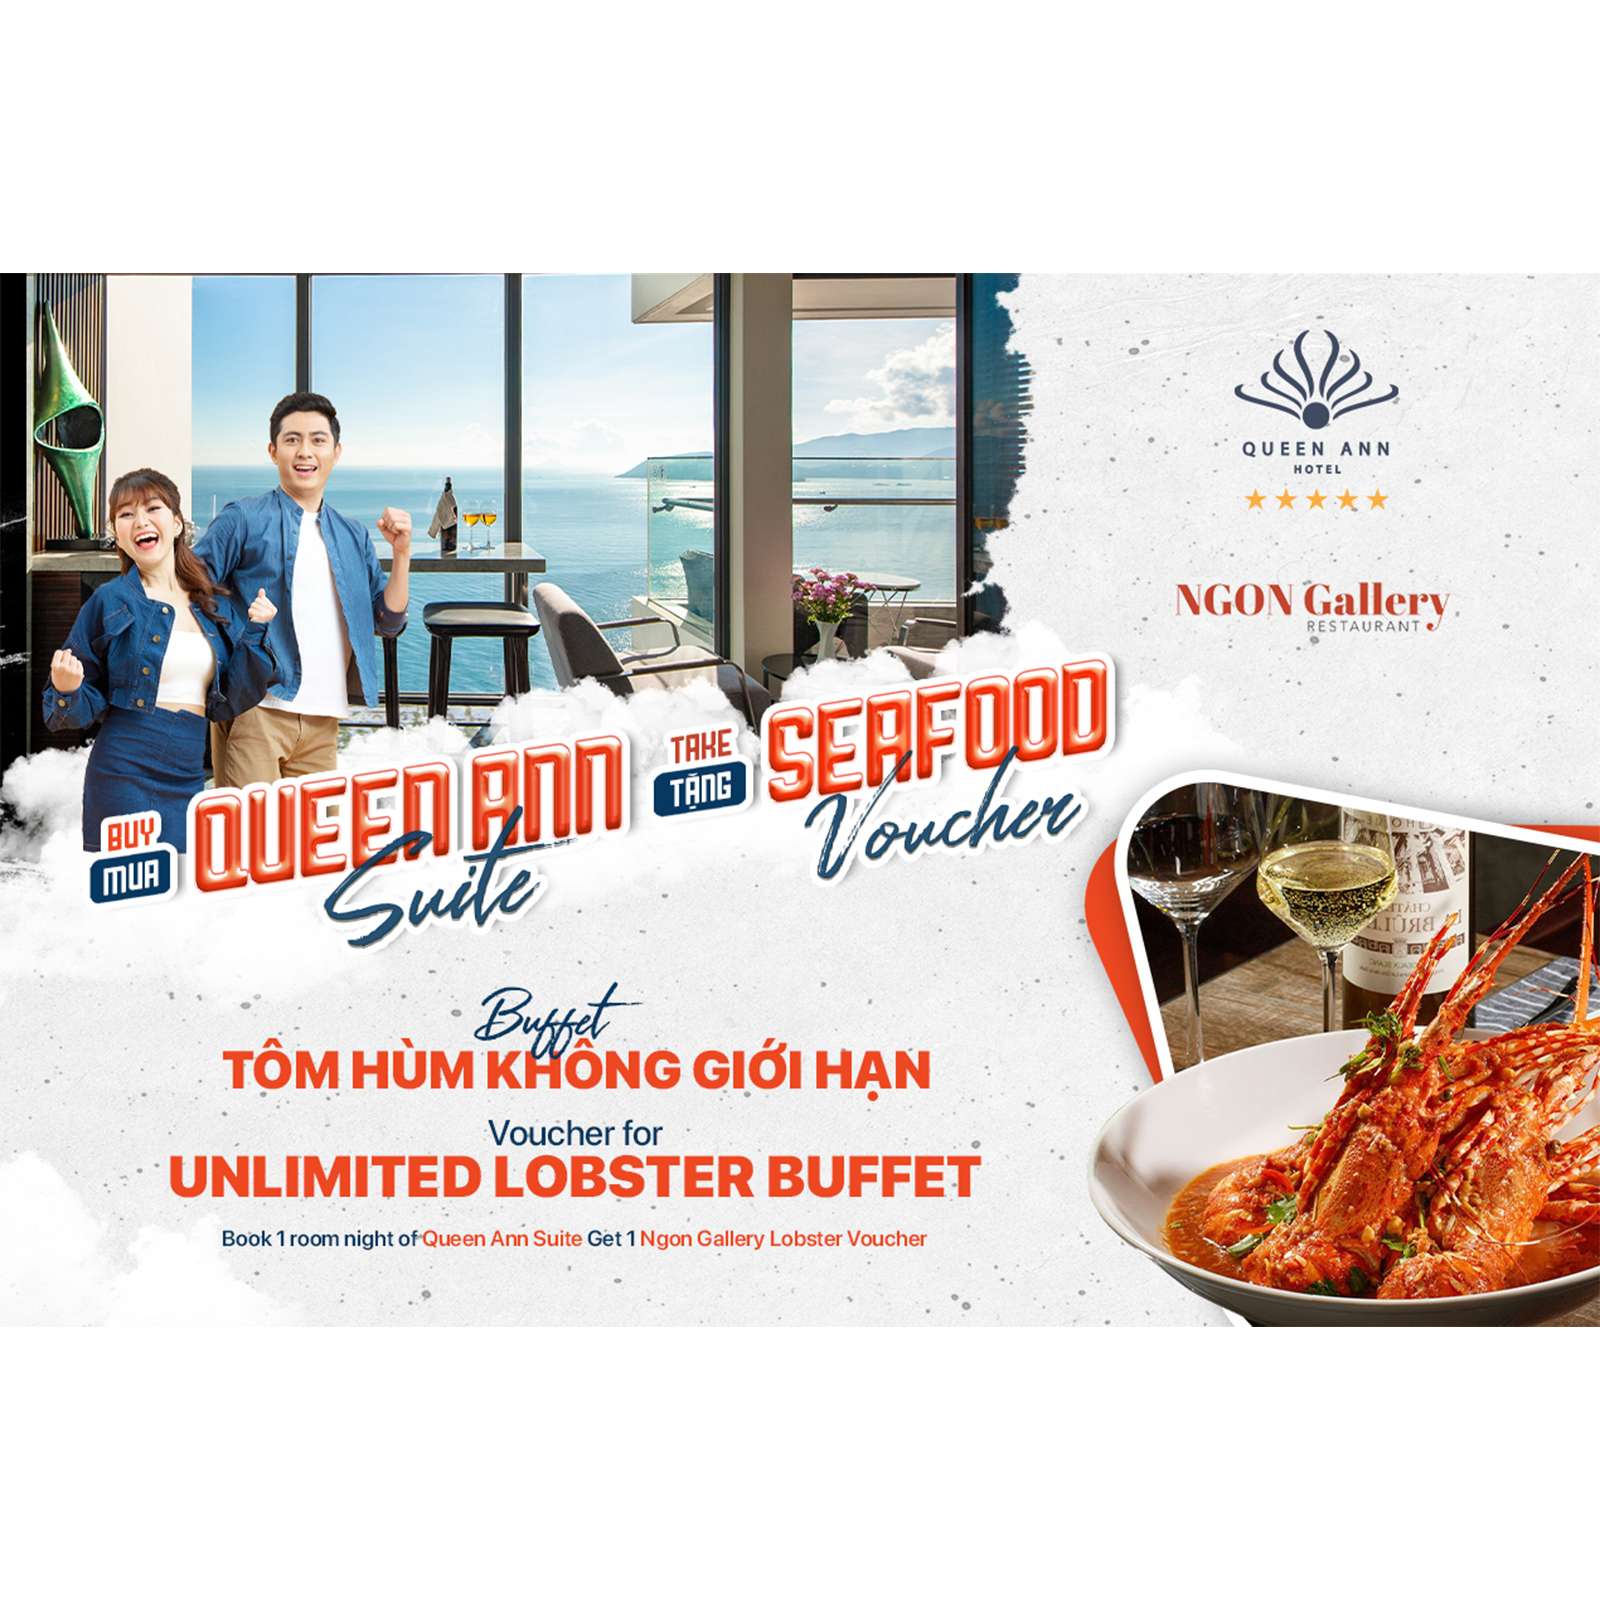 A luxurious journey worthy of class with a 5-star Queen Ann Suite night stay and Unlimited Lobster buffet Ngon Gallery Voucher.